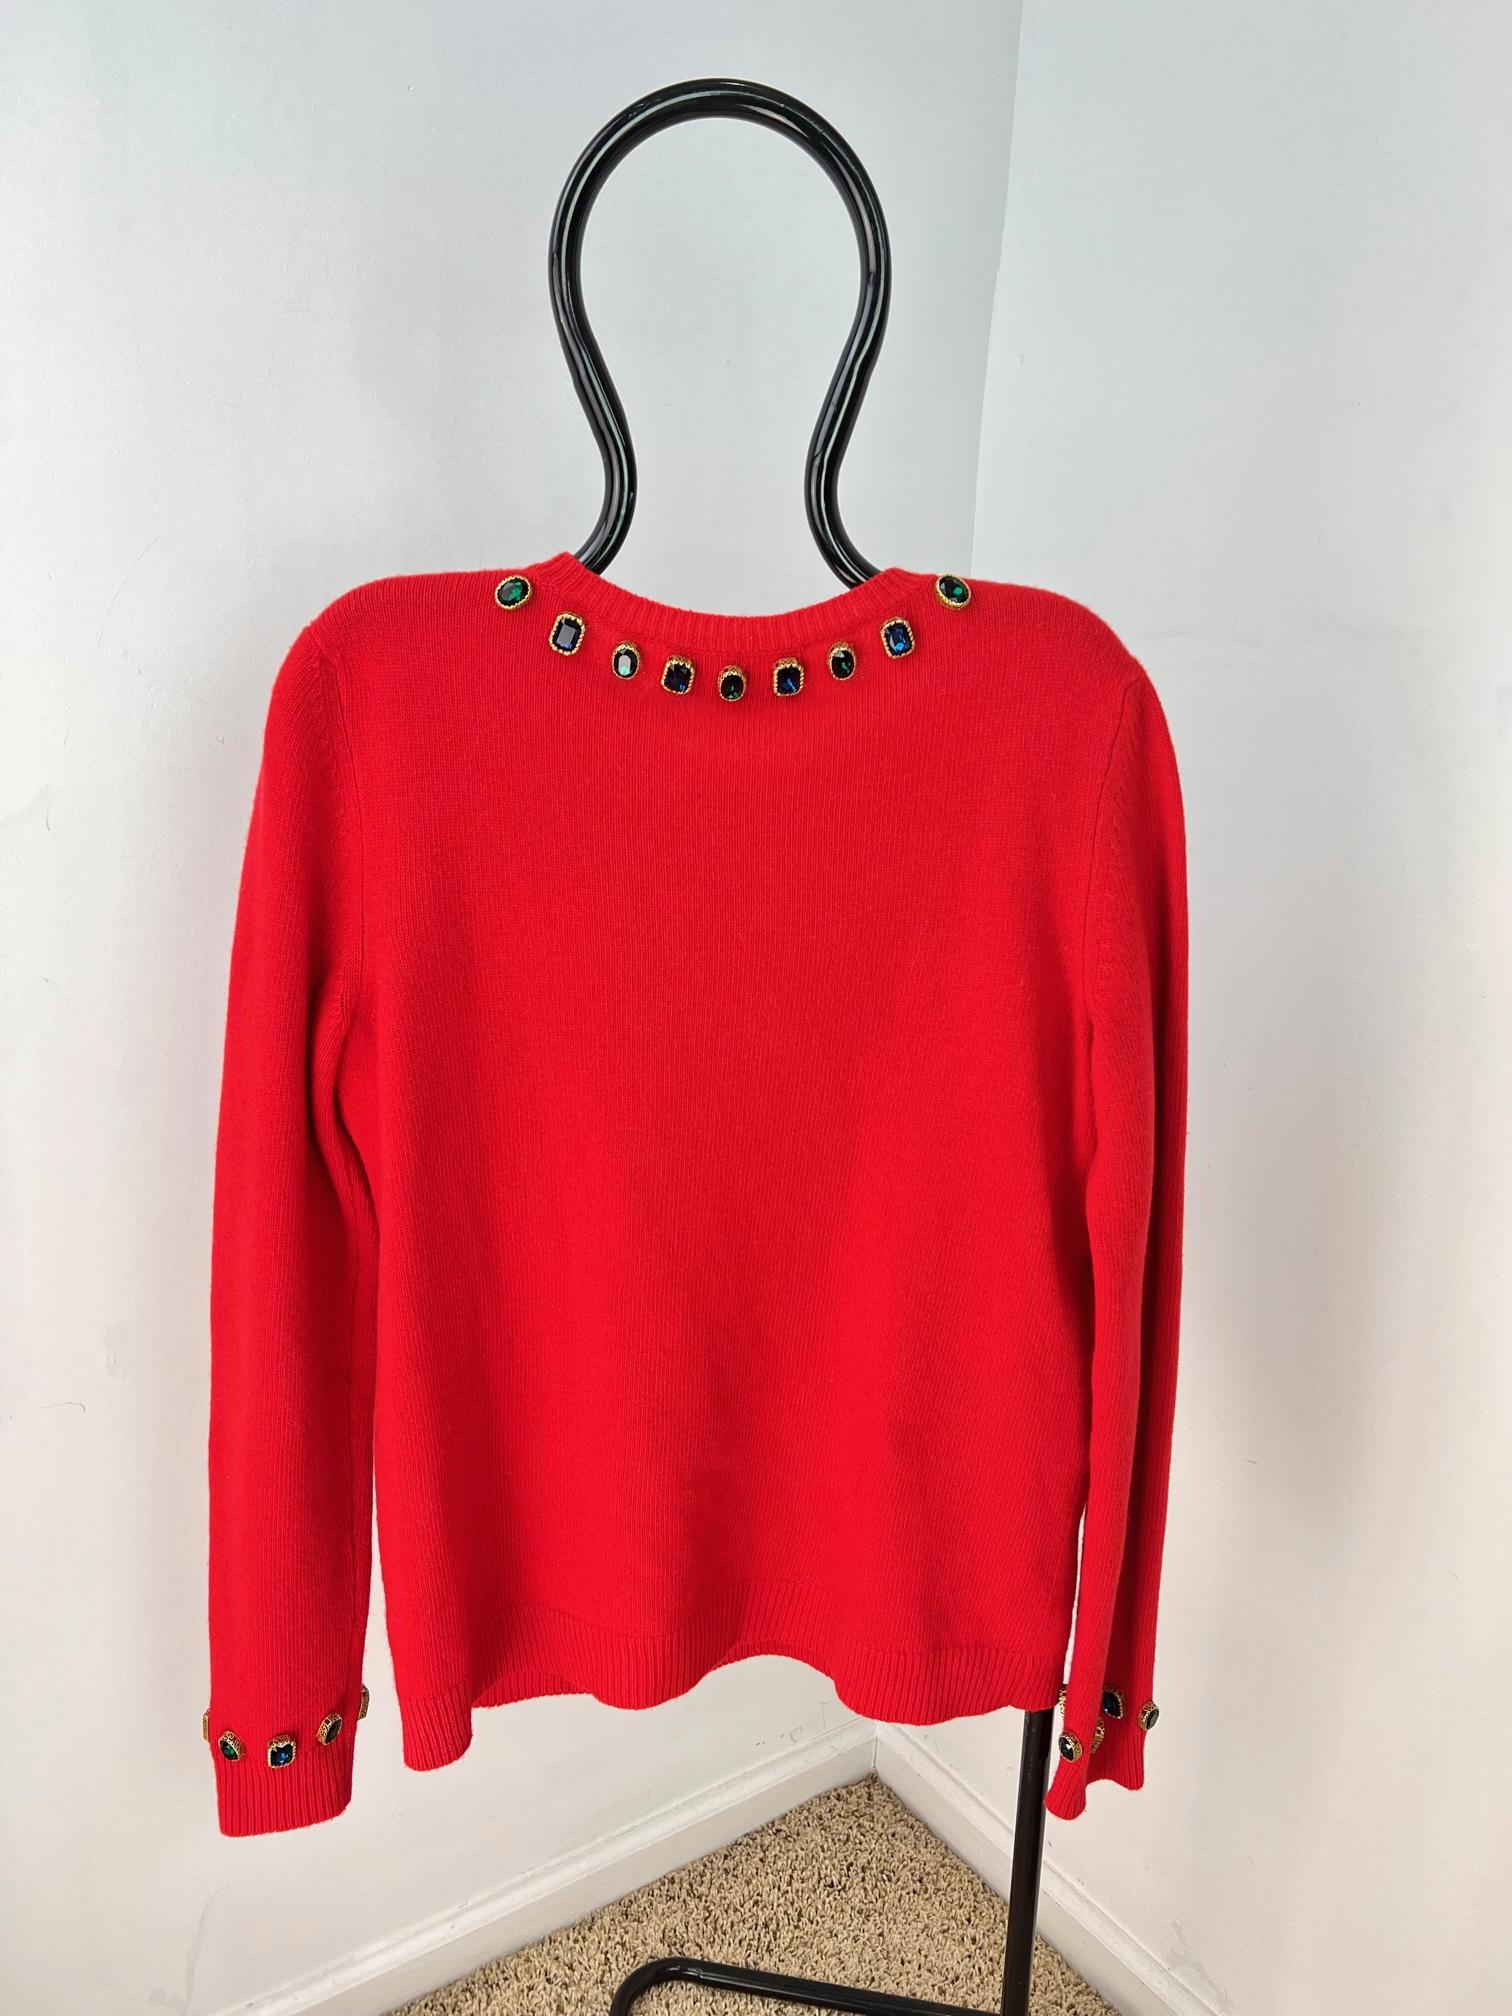 Gucci Womens NY Yankees Wool Red Sweater Pullover In Good Condition For Sale In Freehold, NJ